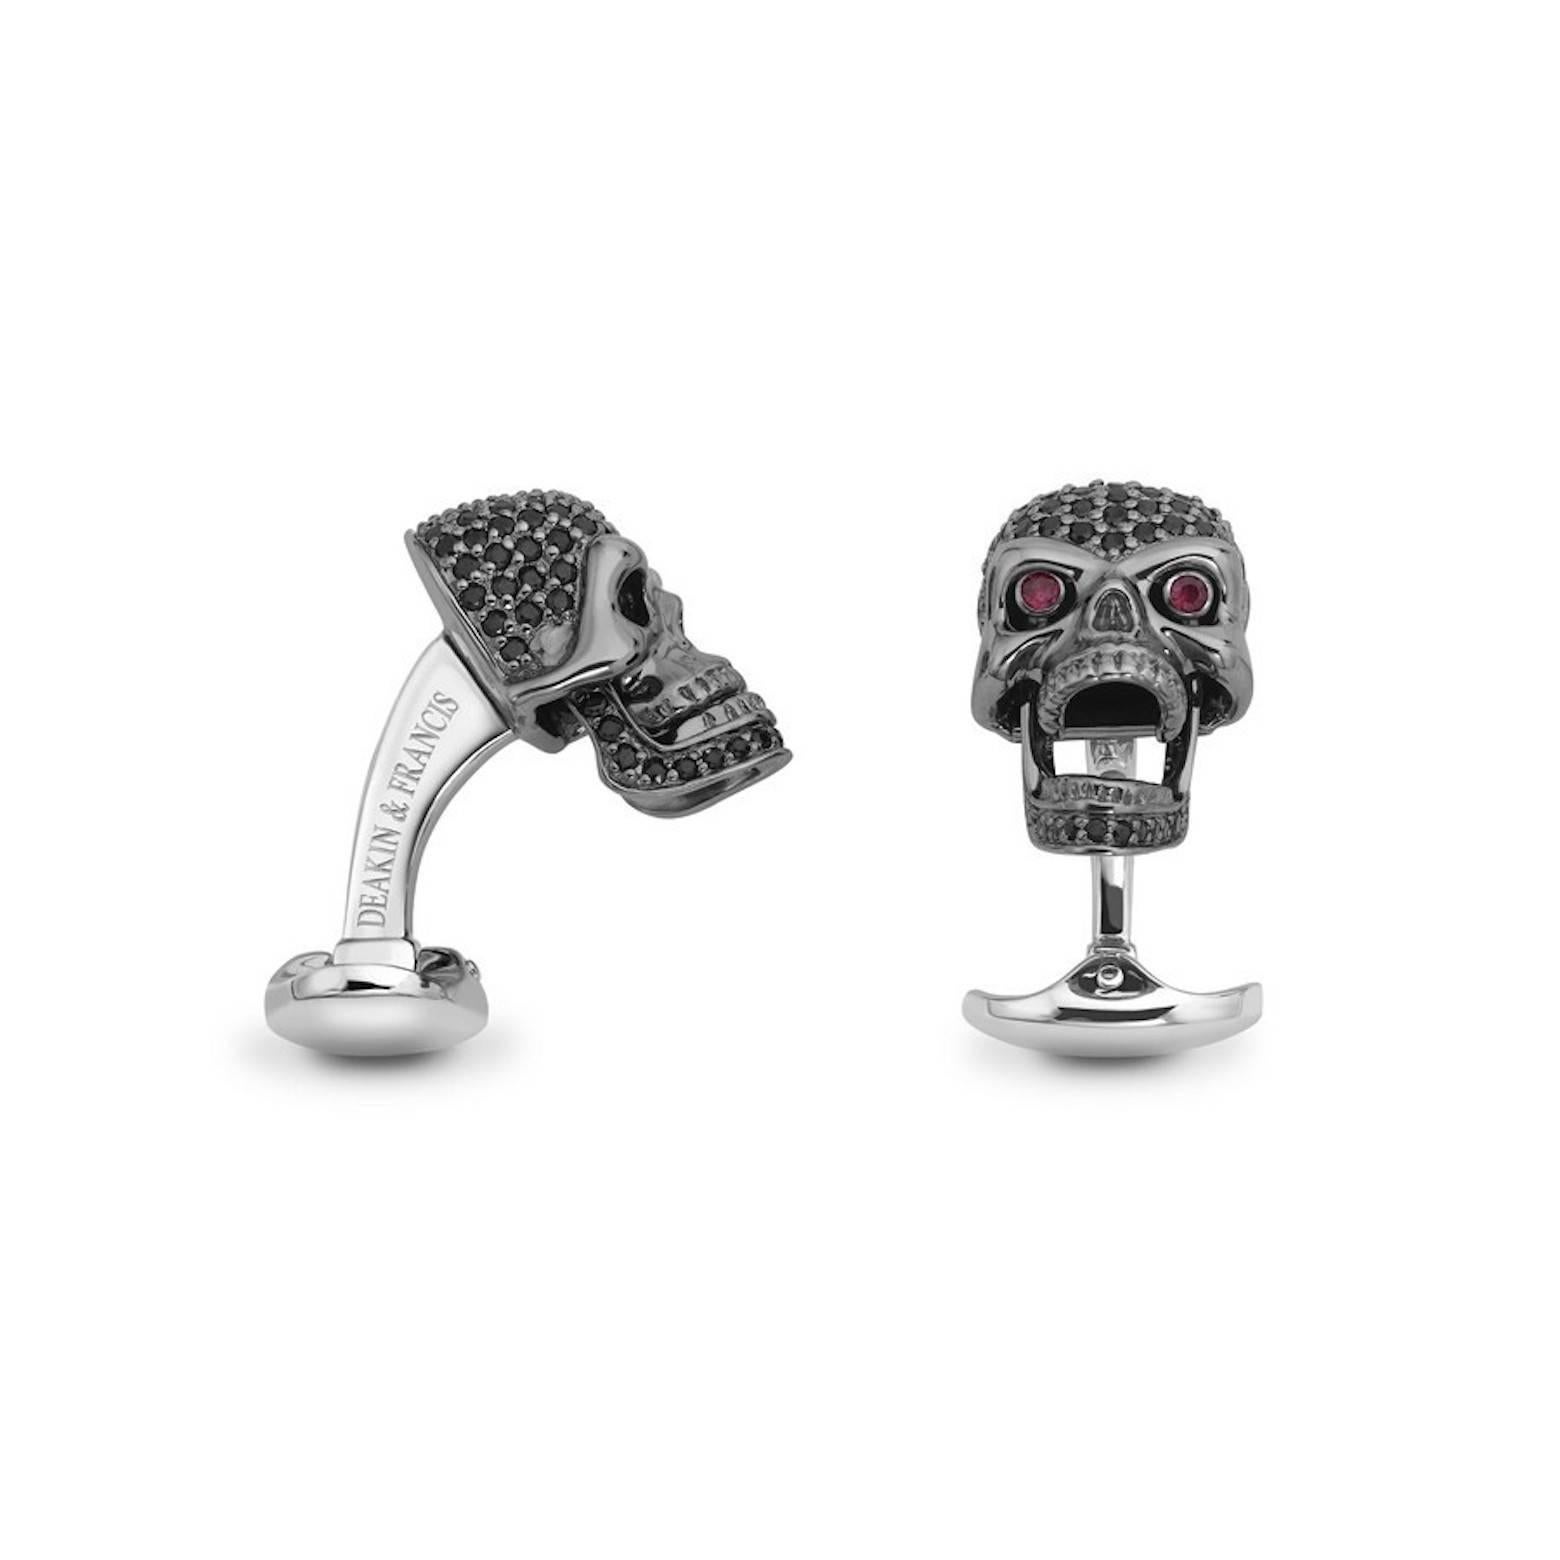 
PLEASE NOTE: OUR PRICE IS FULLY INCLUSIVE OF SHIPPING, IMPORTATION TAXES & DUTIES.

The Deakin & Francis legendary Skull design is popular with celebrities and city slickers worldwide. These black spinel skull cufflinks are opulent